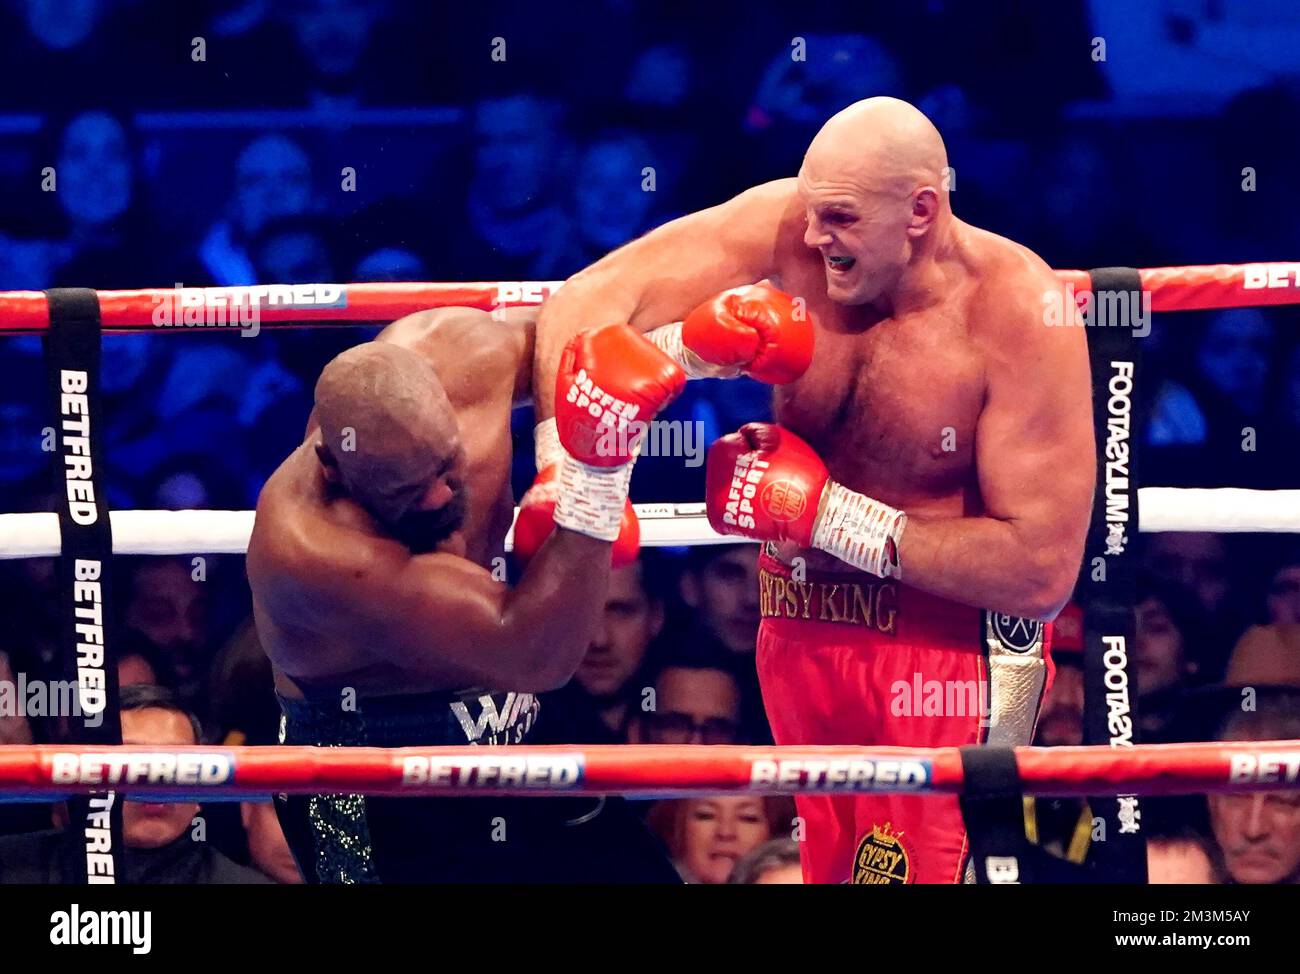 File photo dated 03-12-2022 of Tyson Fury (right) in action against Derek Chisora. Tyson Fury defended his WBC heavyweight world title with a 10th-round stoppage of old rival Derek Chisora to stay on course for a unification showdown with reigning IBF, IBO, WBO and WBA holder Oleksandr Usyk, who was ringside at the Tottenham Hotspur Stadium. Issue date: Friday December 16, 2022. Stock Photo